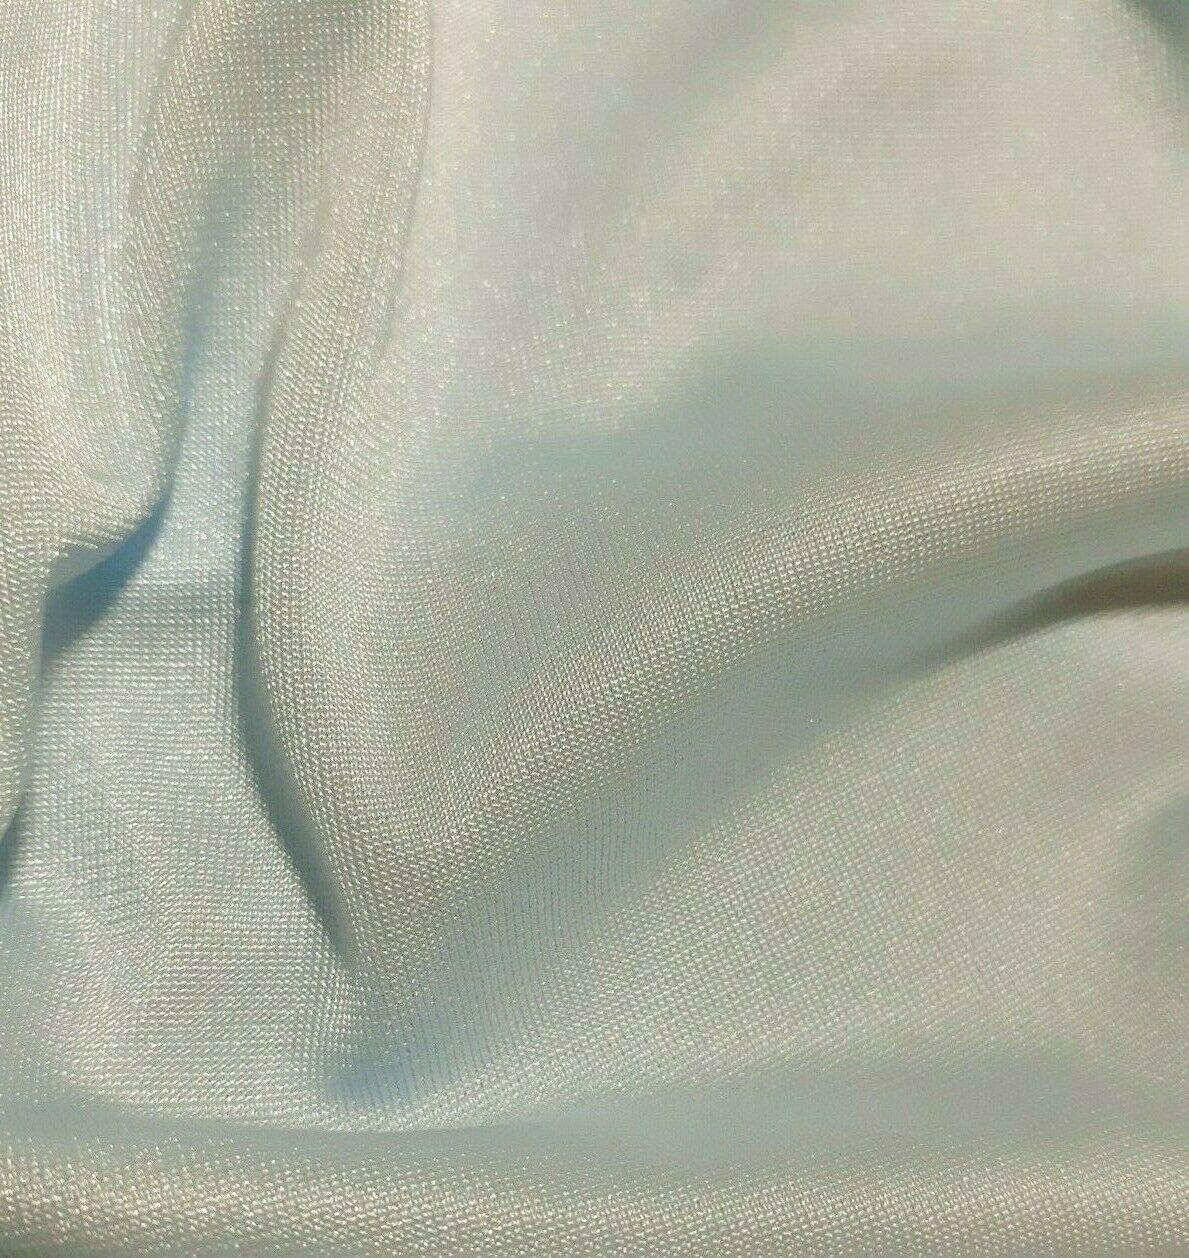 ICE BLUE SHINY THIN JERSEY FABRIC - SOLD BY THE METRE